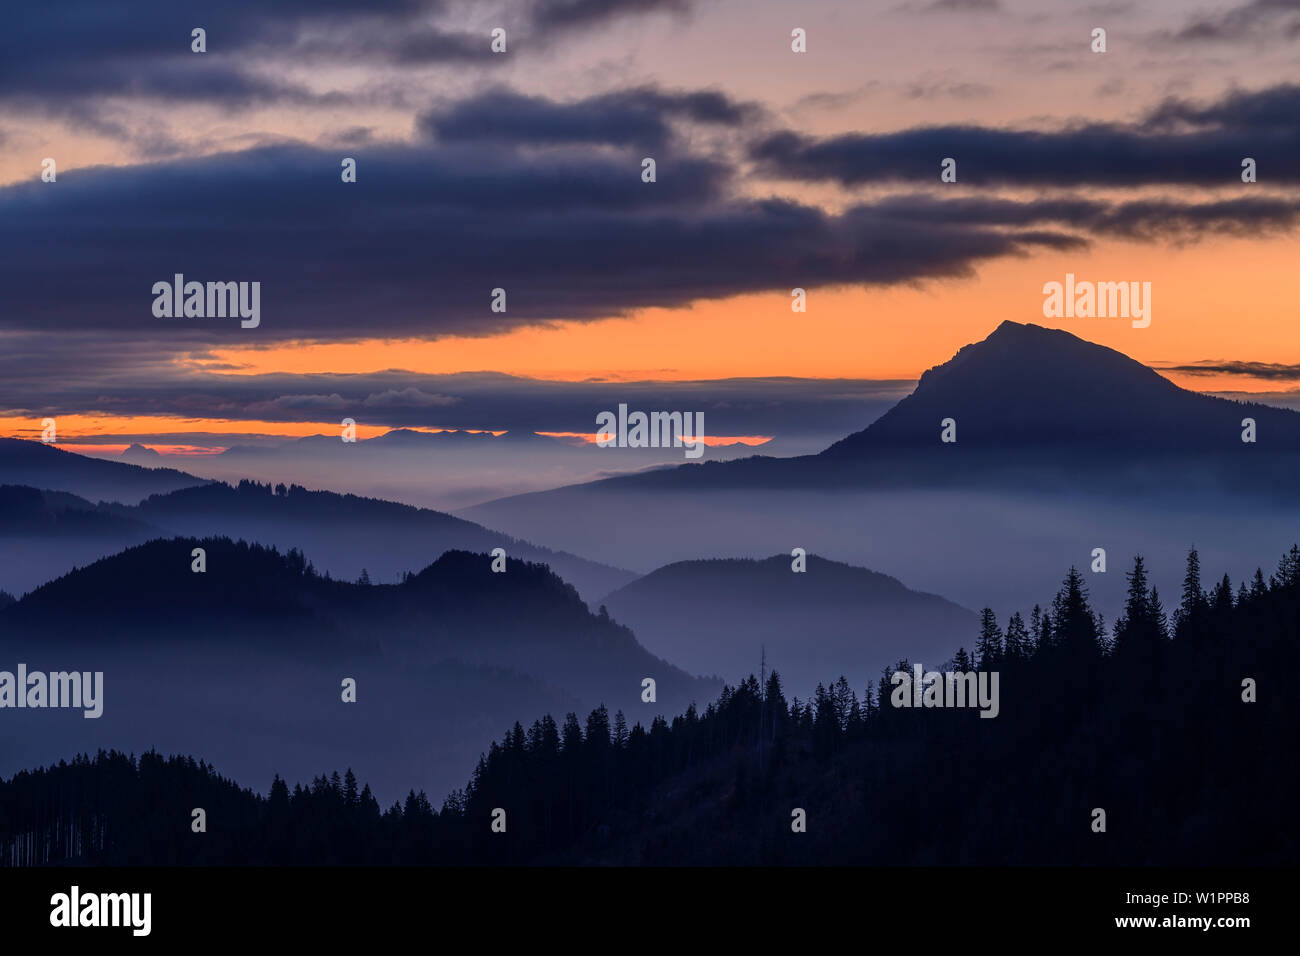 Silhouettes of Zwiesel and Chiemgau Alps at dawn, from Hochfelln, Chiemgau Alps, Upper Bavaria, Bavaria, Germany Stock Photo